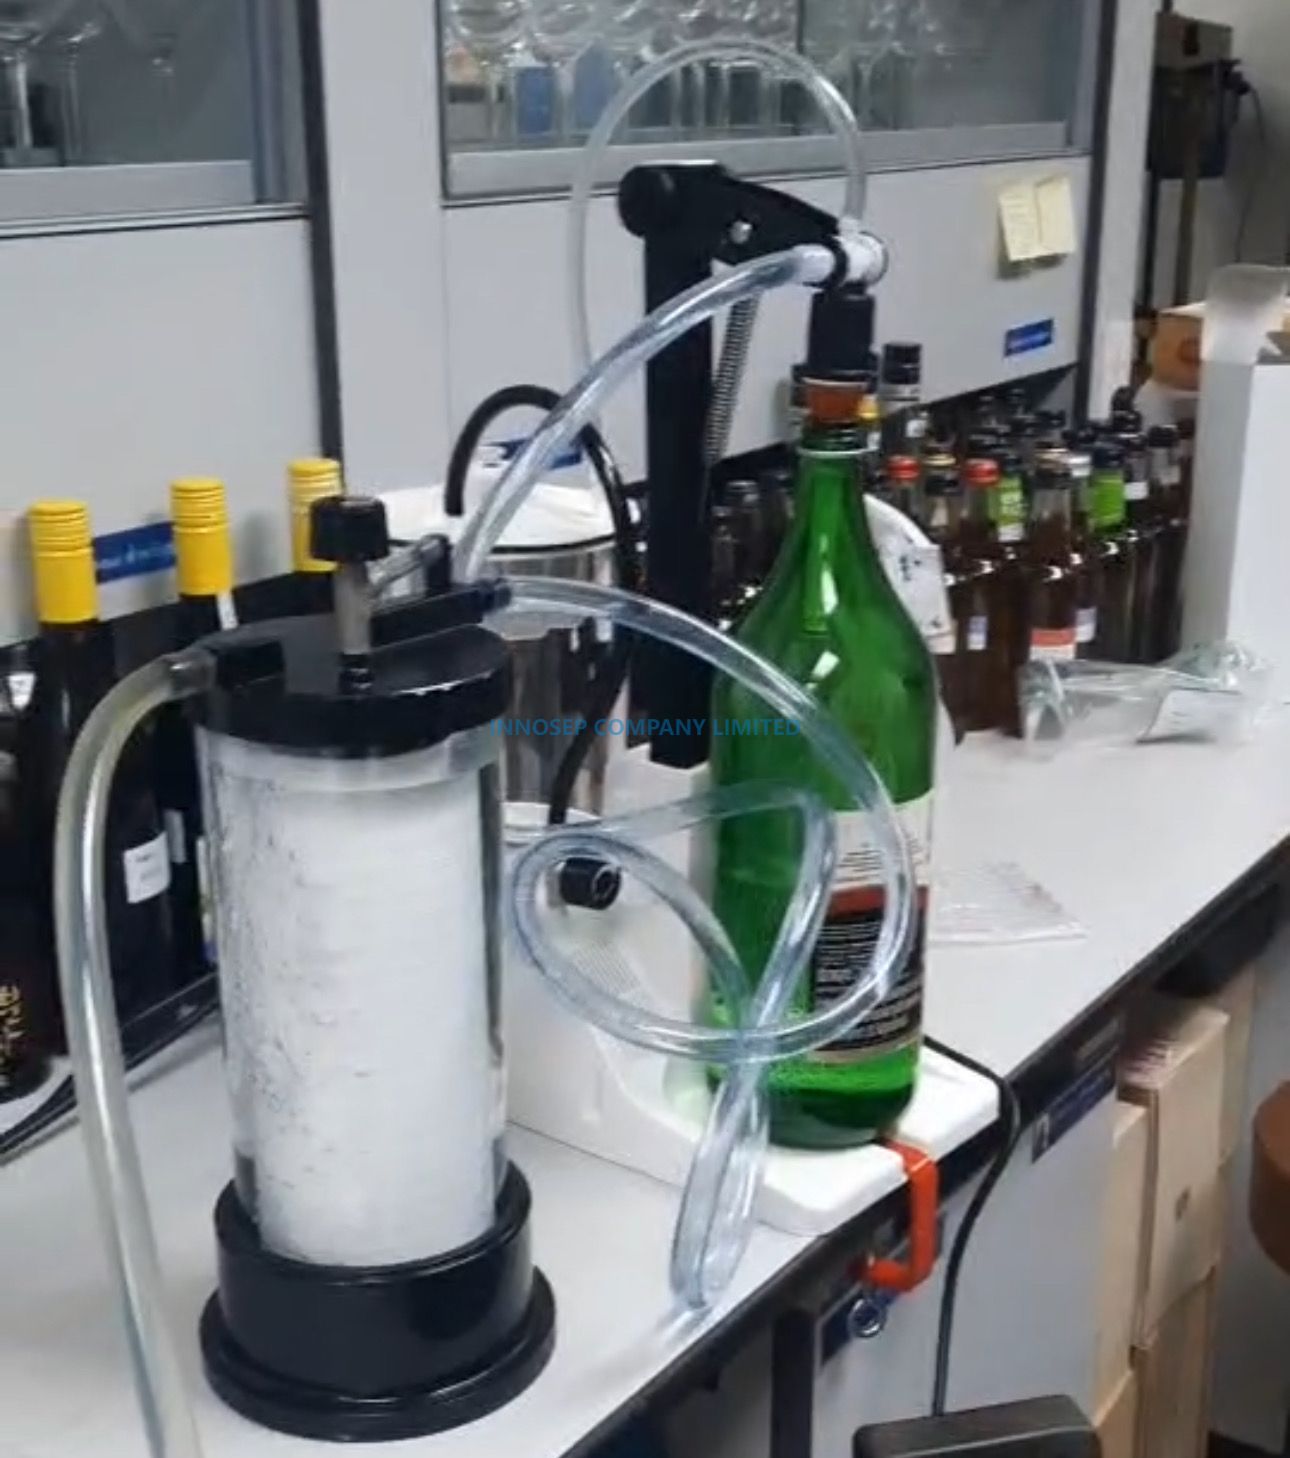 From Factory to Home: Innosep's New Introduction of Versatile Vacuum Wine Filling Device to Thailand “Pumps Up” The Wine Cooler Production Processes